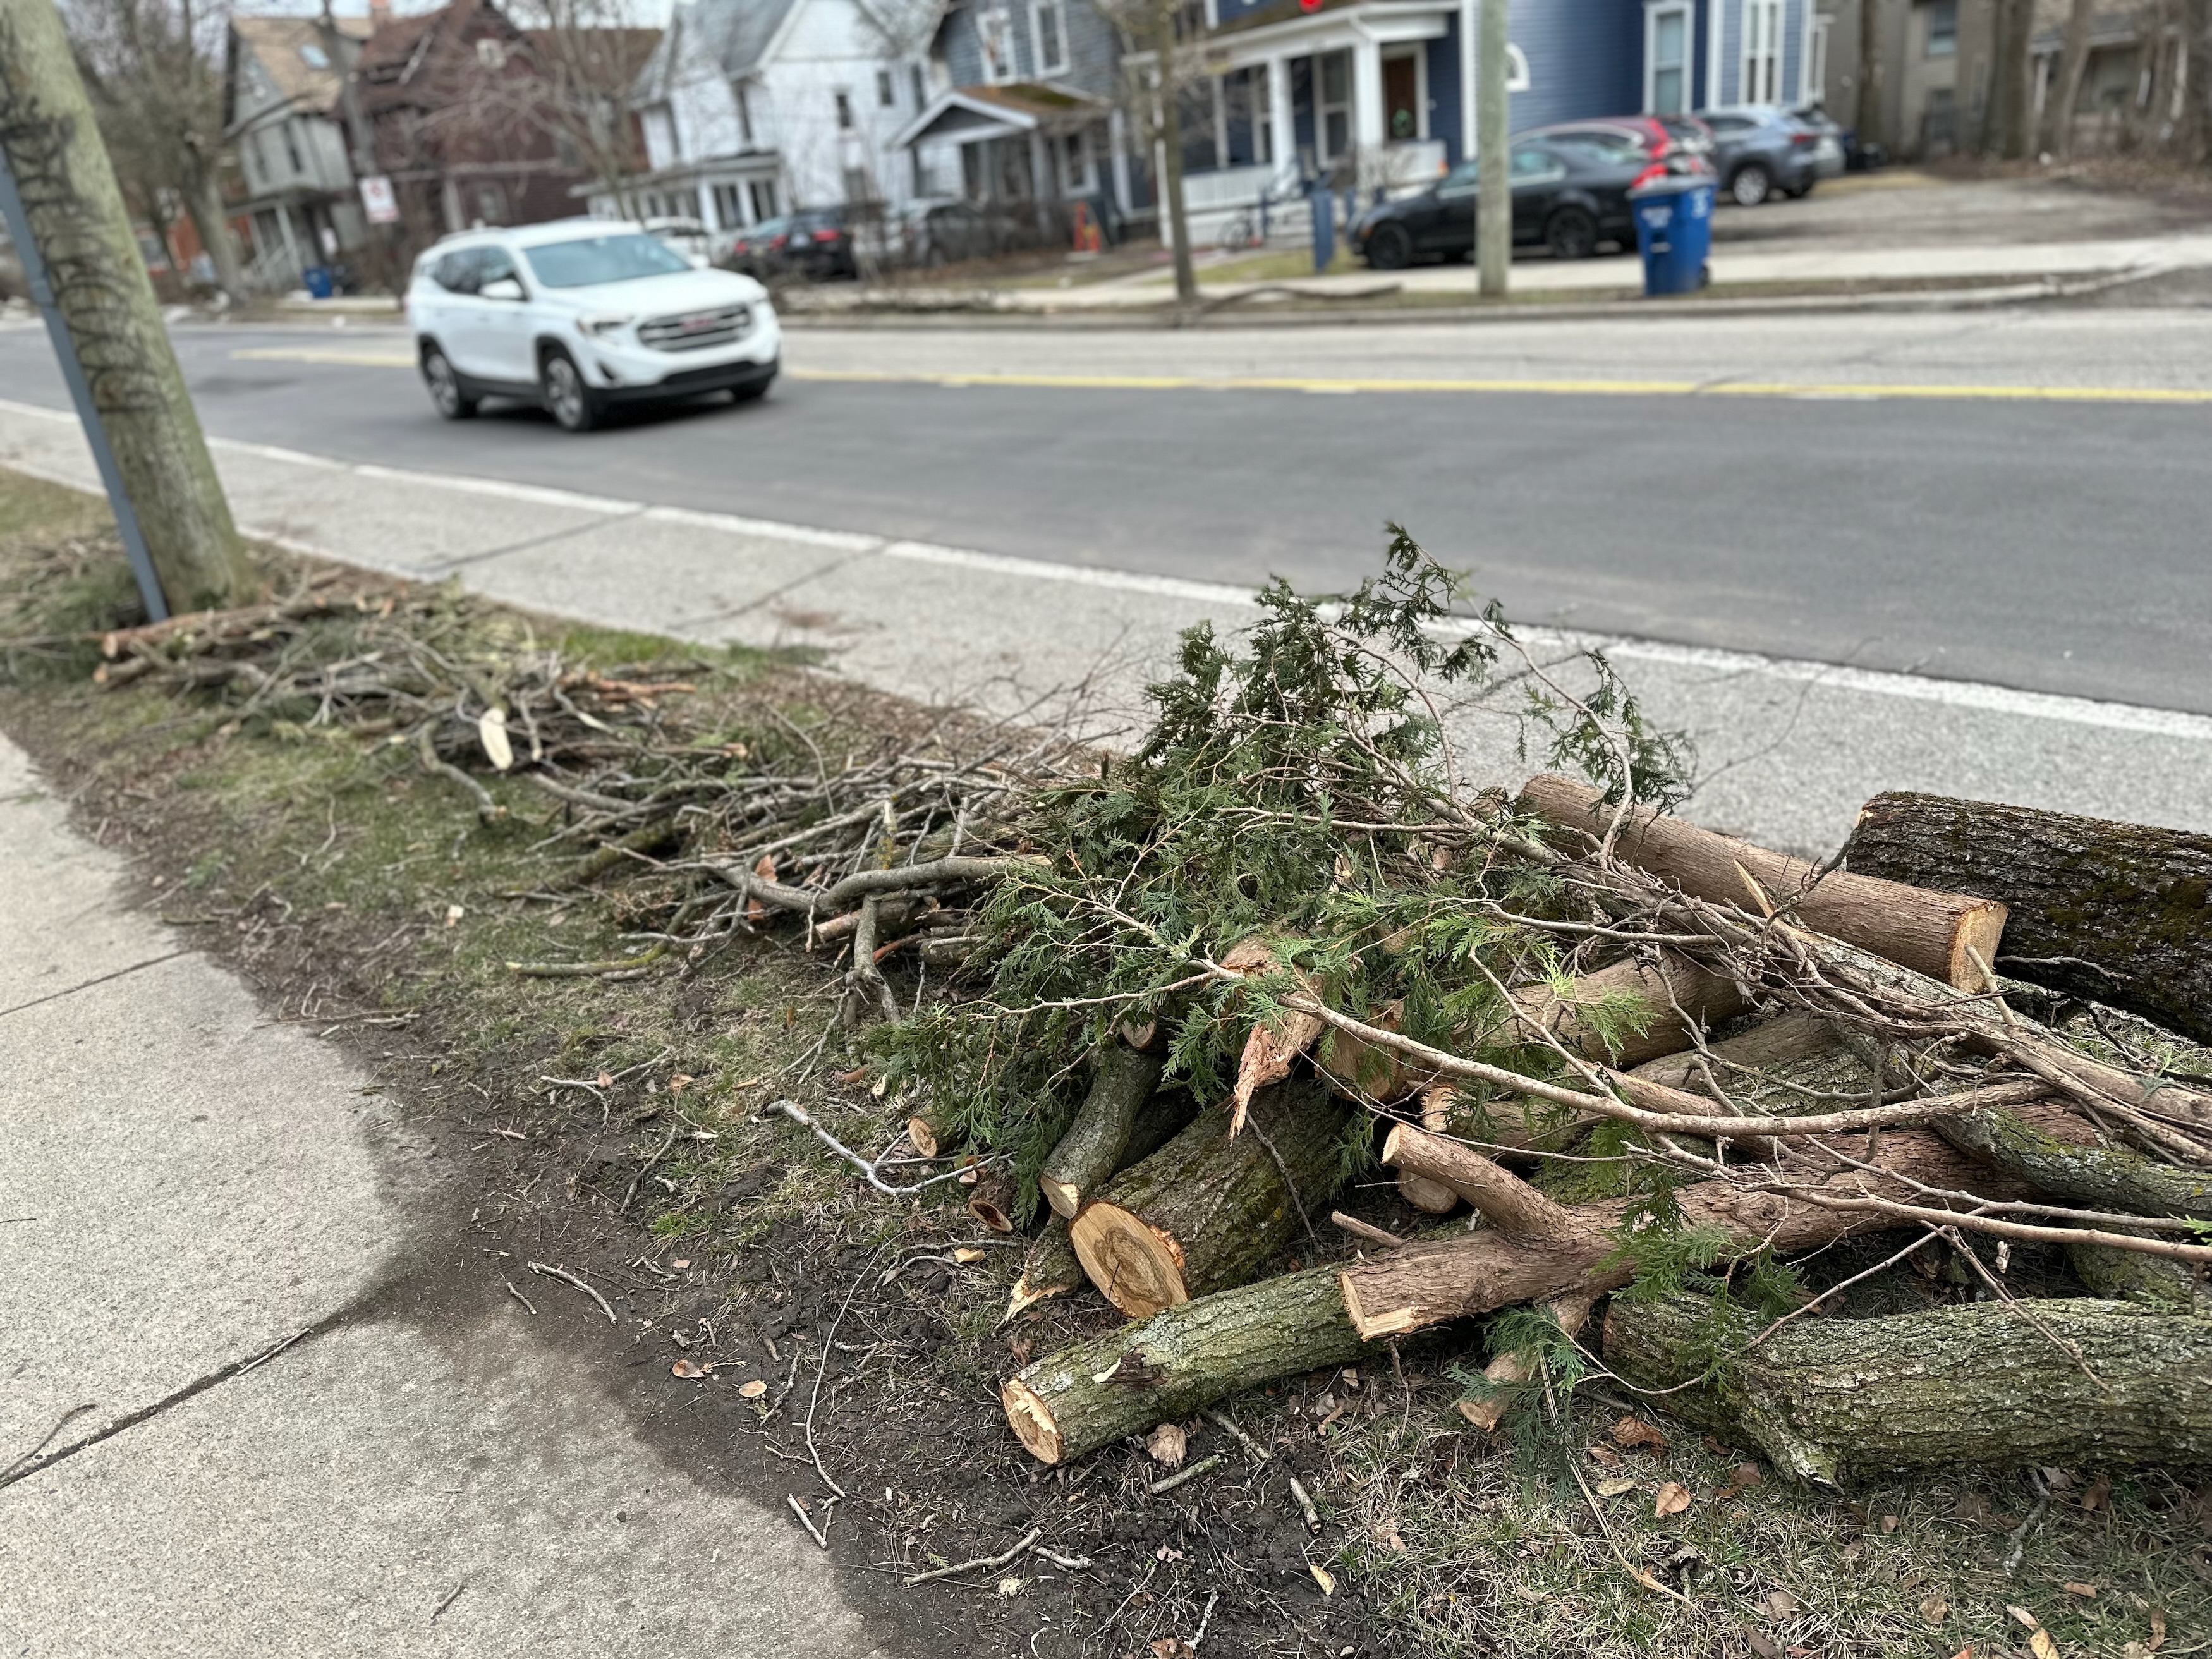 Tree branch pickup plans announced for Ann Arbor, Ypsilanti areas following  ice storm